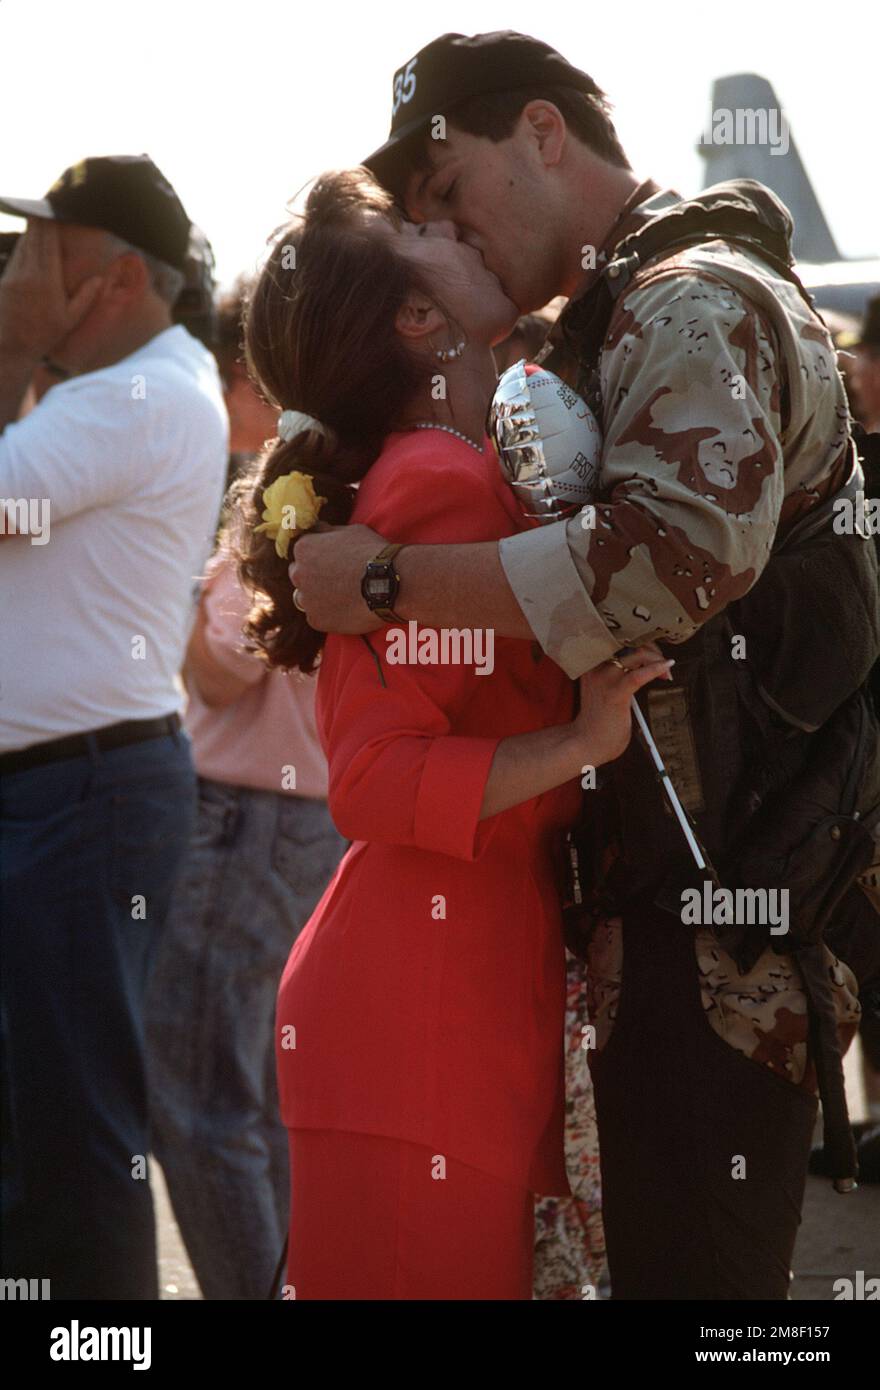 A pilot from Attack Squadron 35 (VA-35) kisses his wife as they are reunited upon the squadron's arrival at the air station. VA-35 has returned to Oceana following its deployment to the Persian Gulf region aboard the aircraft carrier USS SARATOGA (CV-60) for Operation Desert Shield and Operation Desert Storm. Subject Operation/Series: DESERT STORMDESERT STORM Base: Naval Air Station, Oceana State: Virginia(VA) Country: United States Of America (USA) Stock Photo